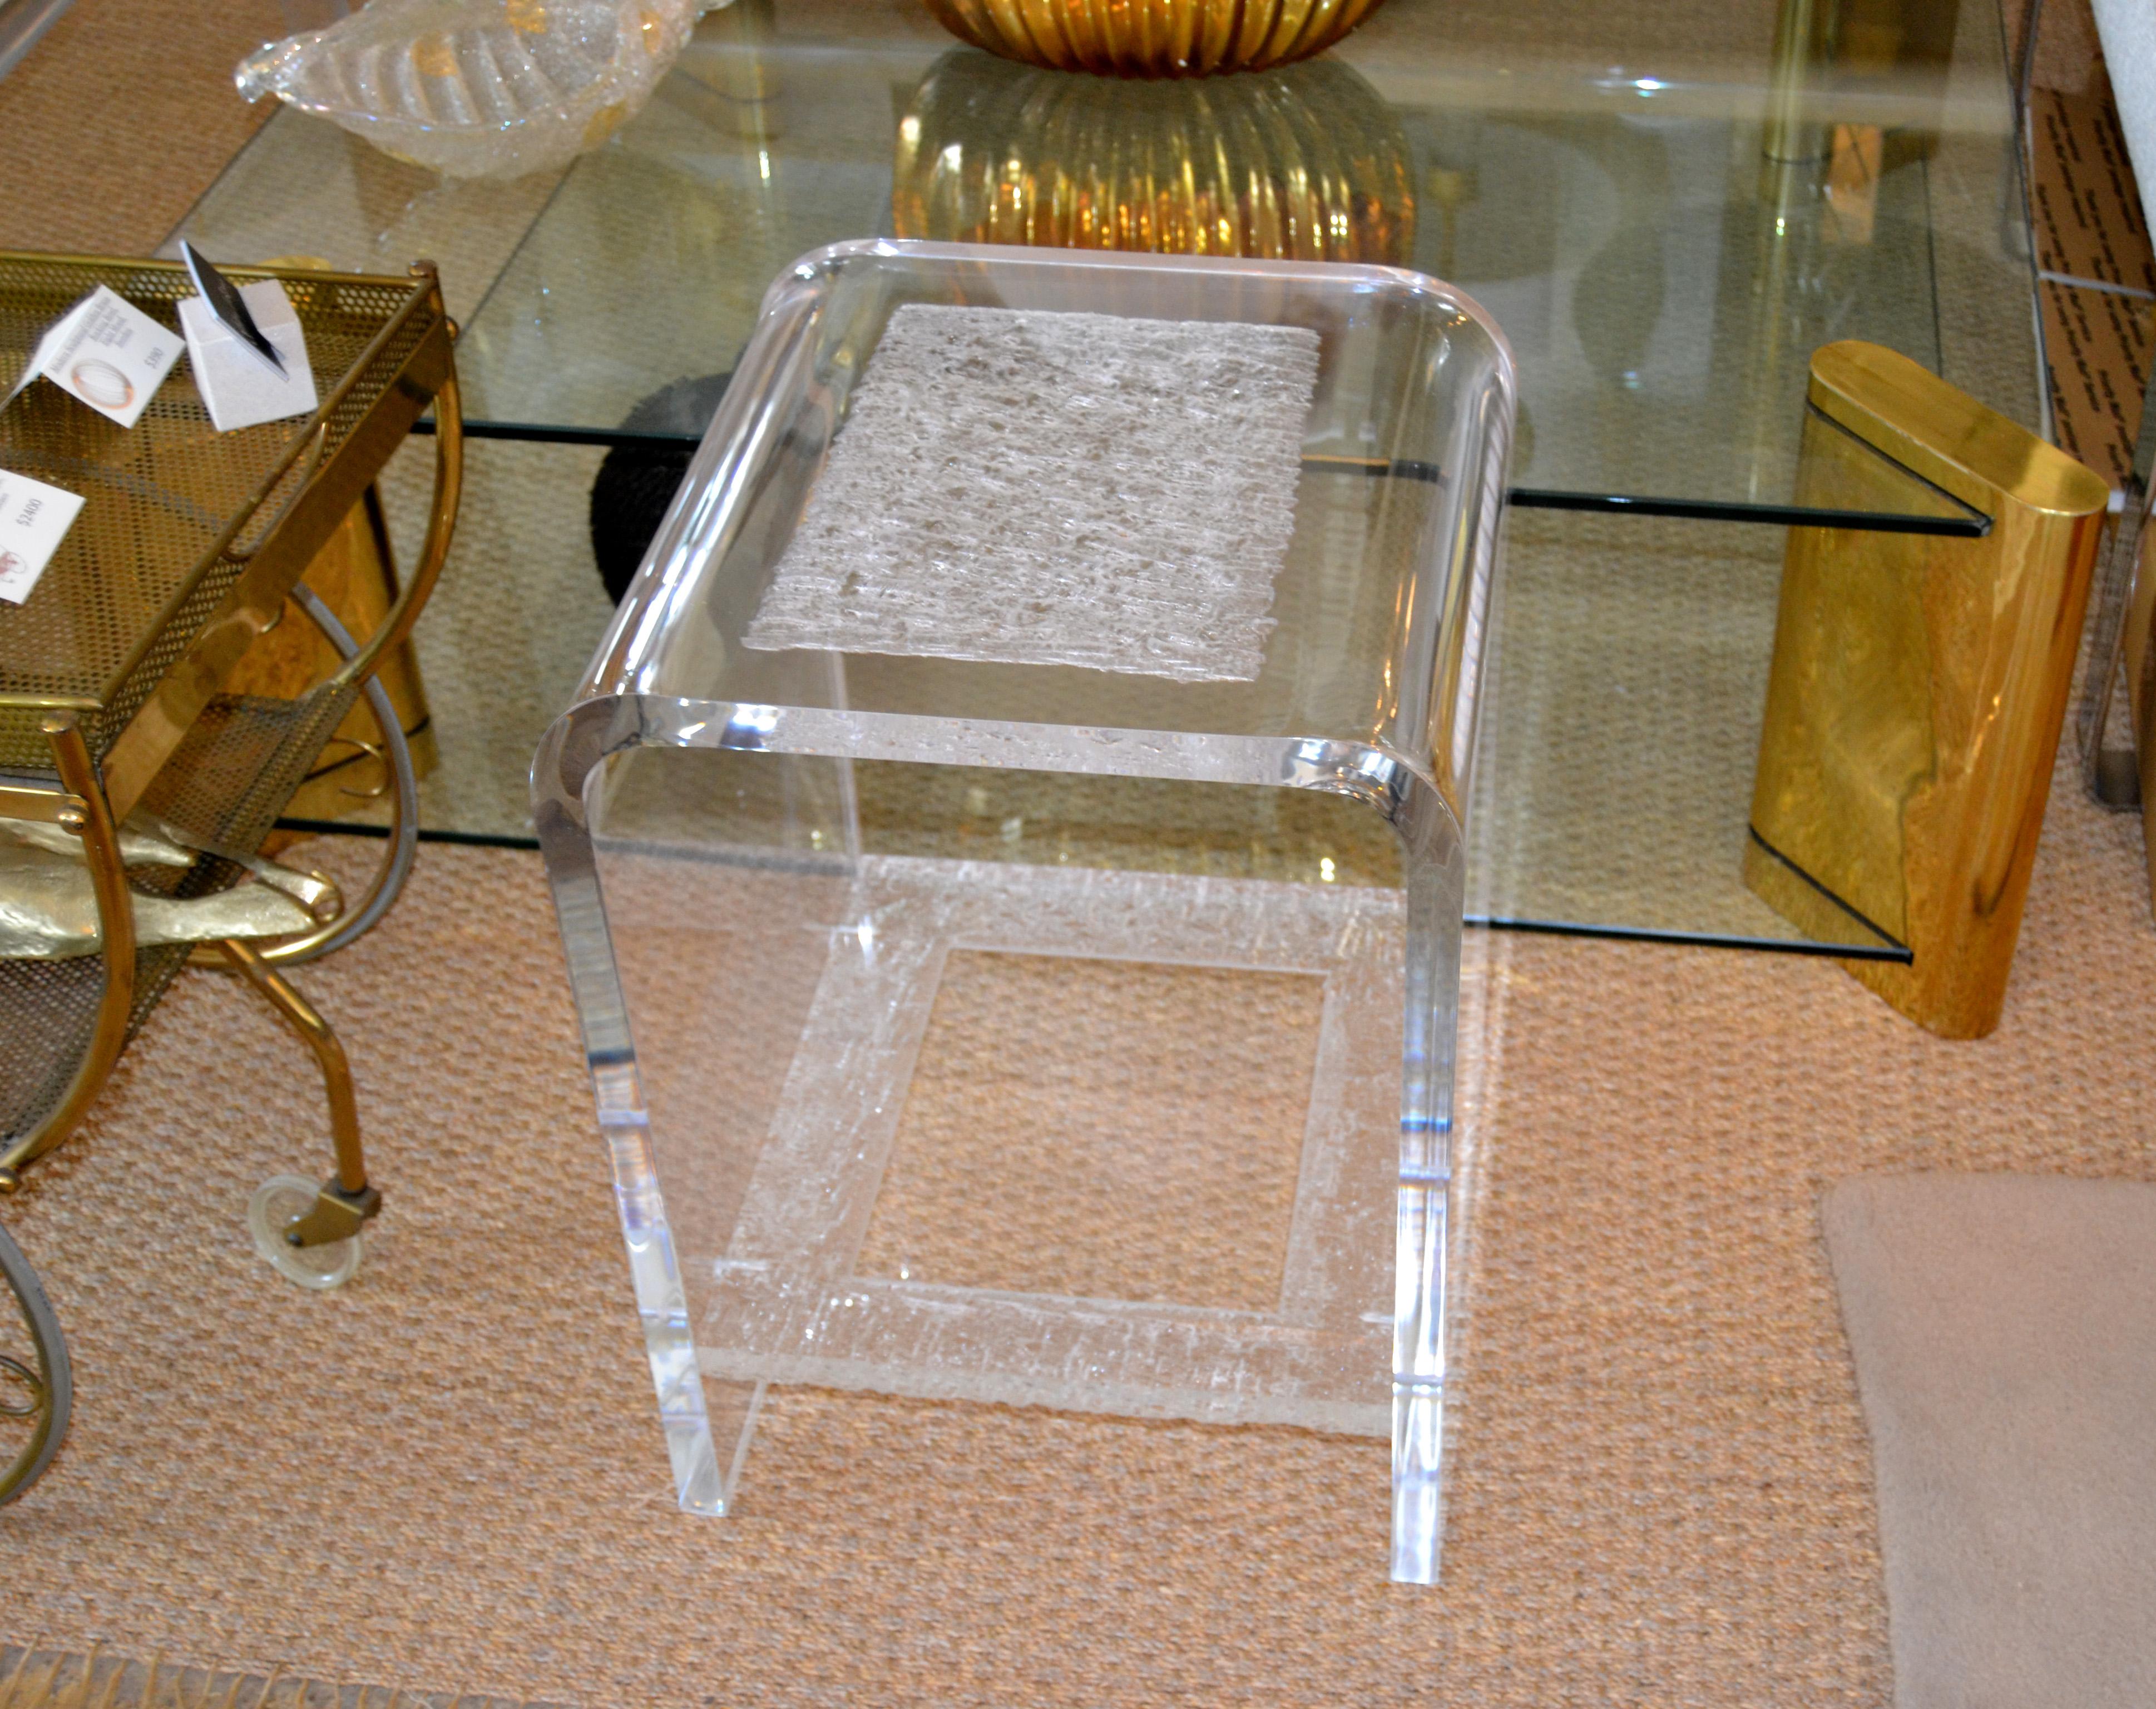 Modern one inch thick two-tier clear Acrylic side table or end table.
The top and base are having chiseled details that appear like crystallized, stunner done.
Sturdy and heavy craftsmanship in clean design.